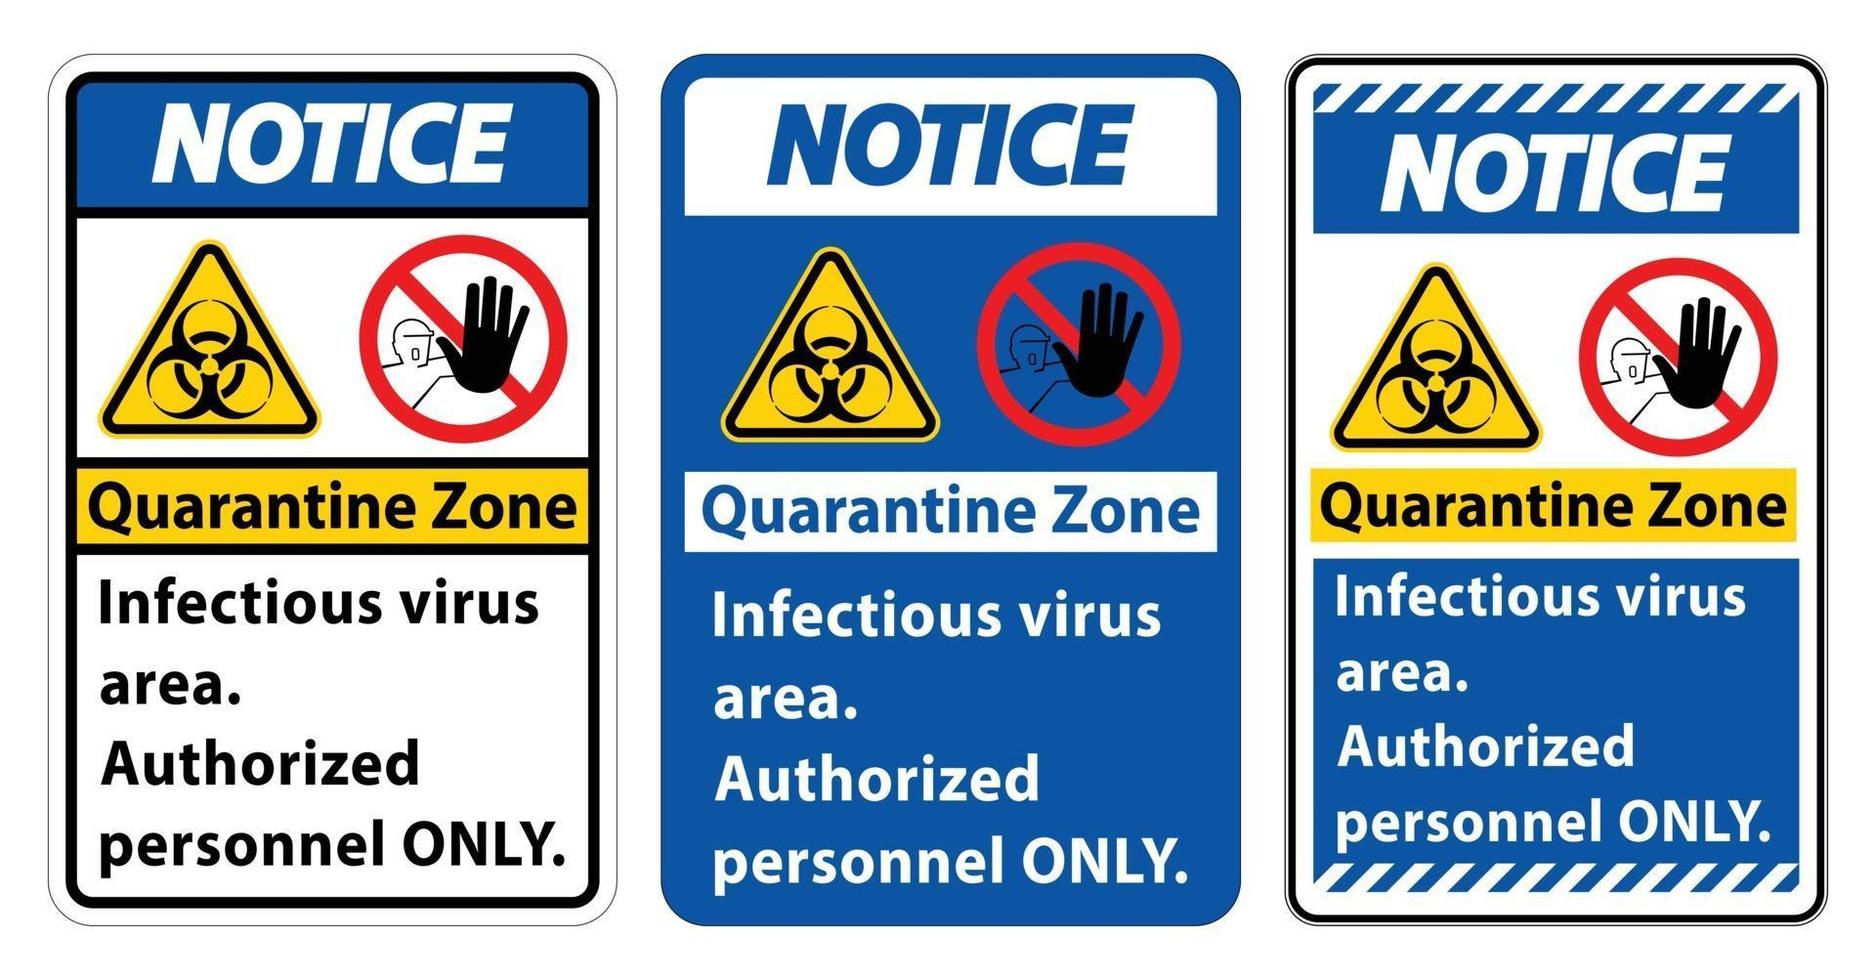 Notice Quarantine Infectious Virus Area sign on white background vector